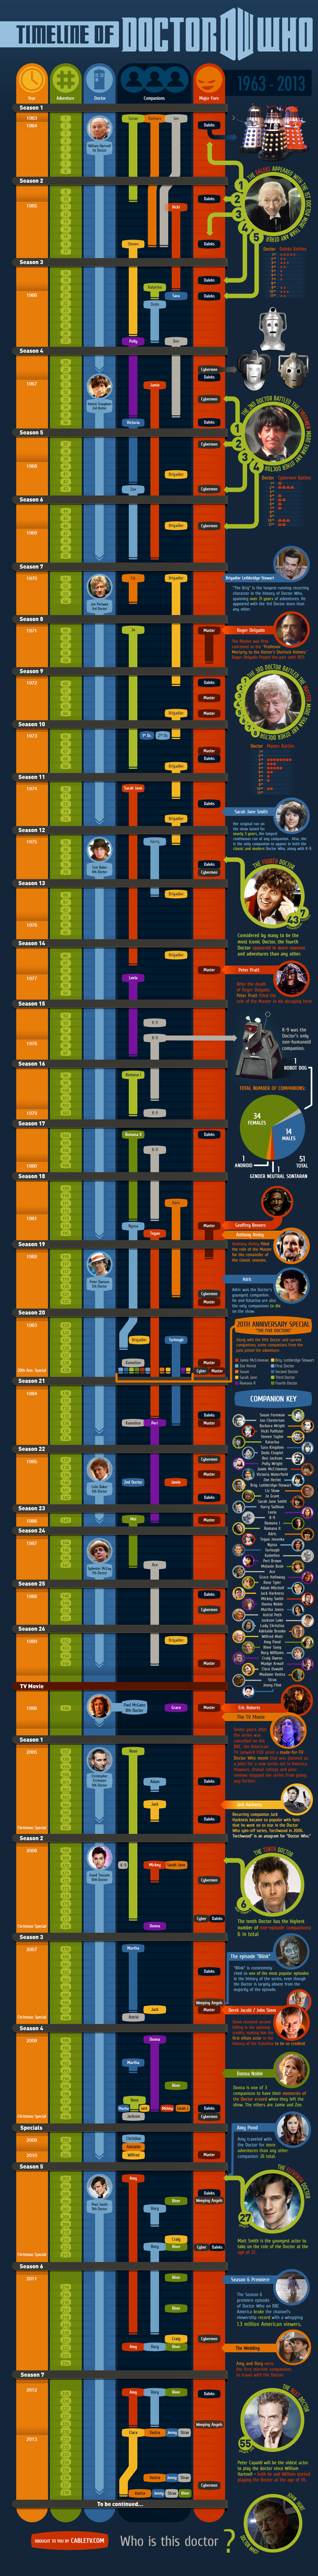 All Doctor Who Episodes in Chronological Order Infographic